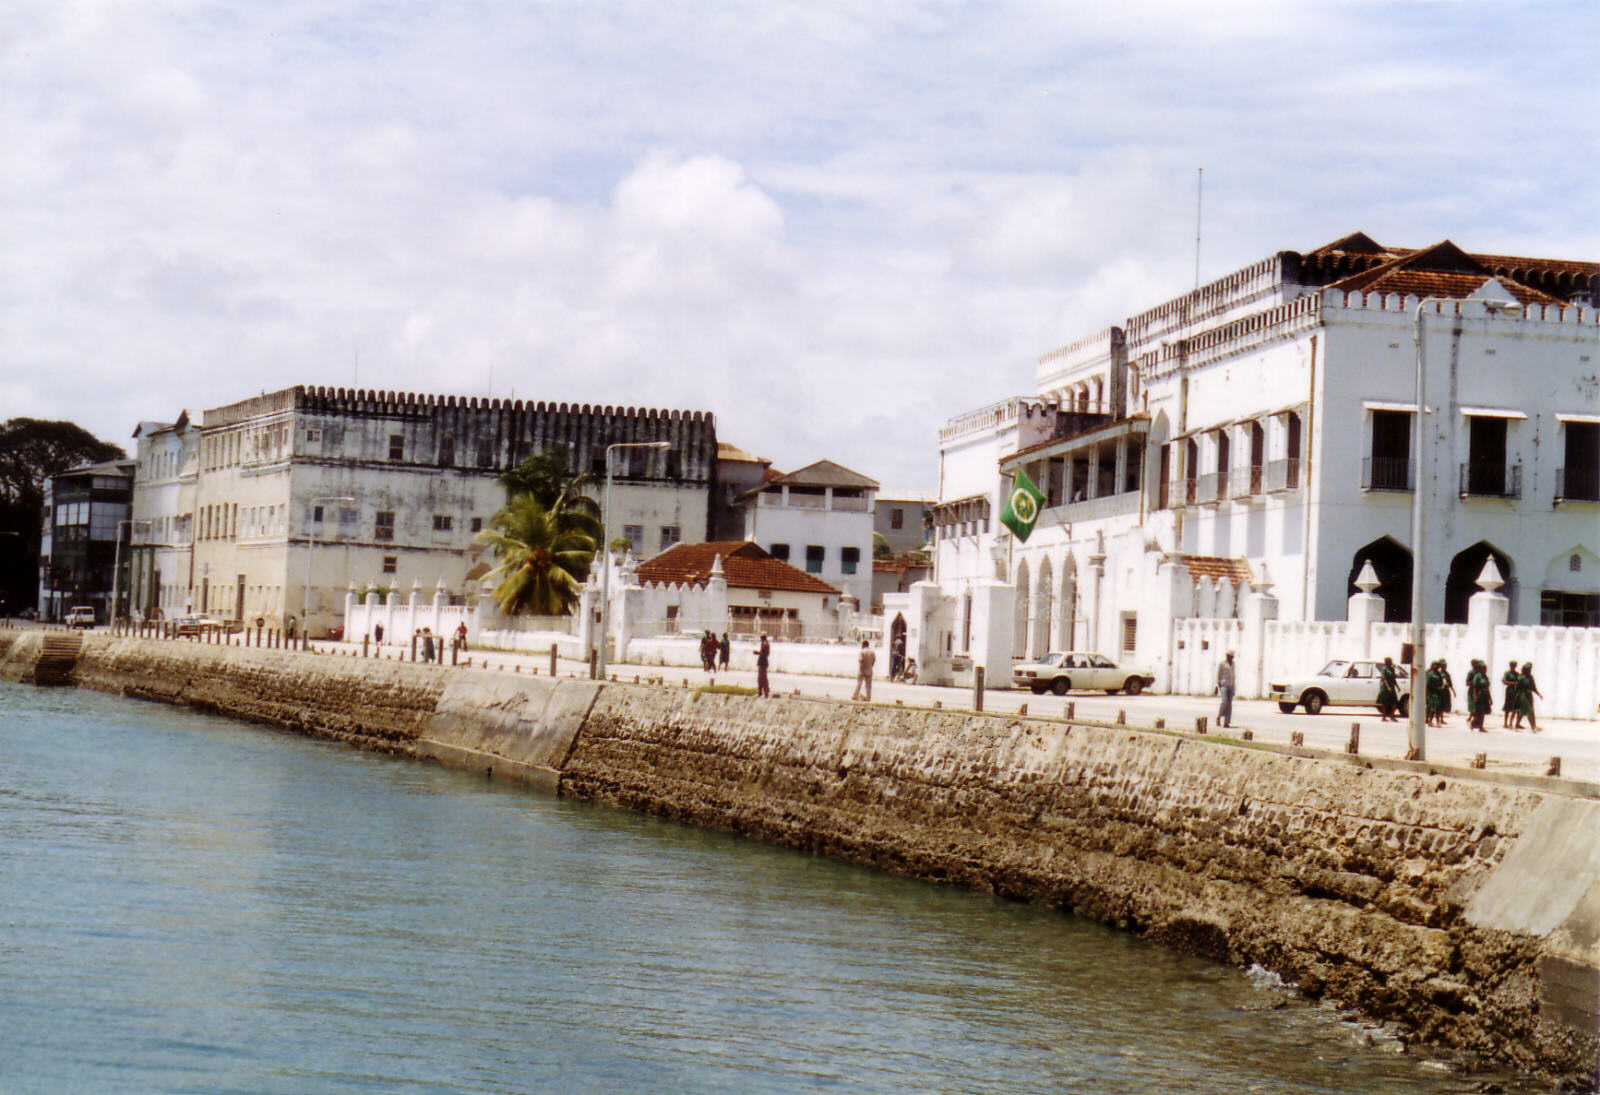 The Sultan's palace, now the People's palace, Zanzibar